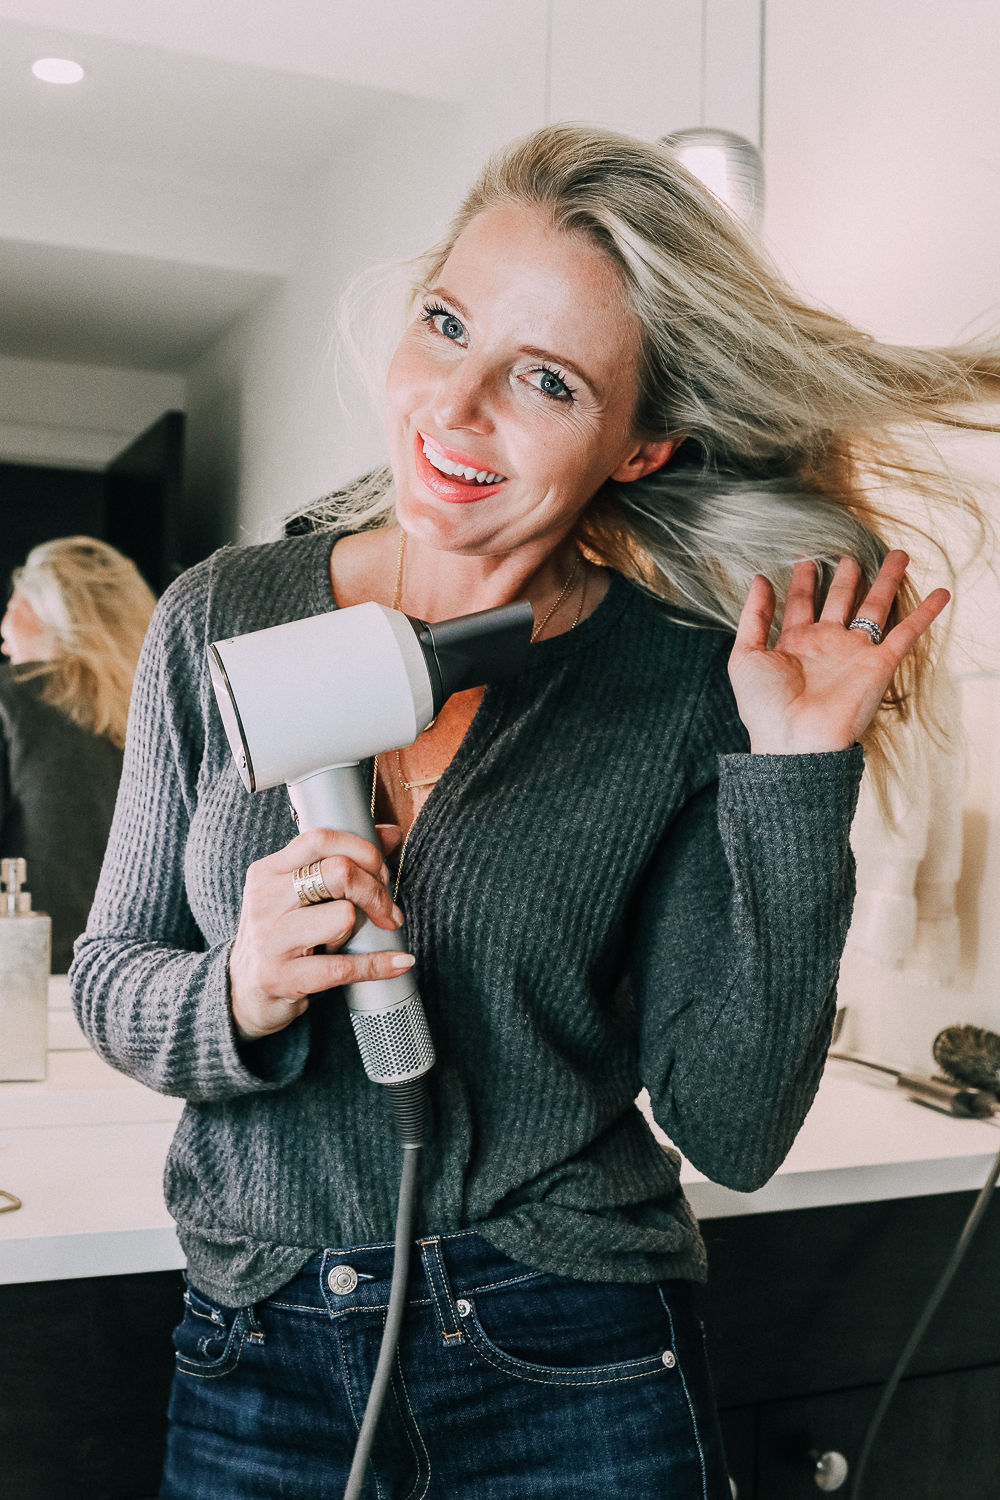 Best Selling Gifts QVC featuring the Dyson hair dryer in white and silver